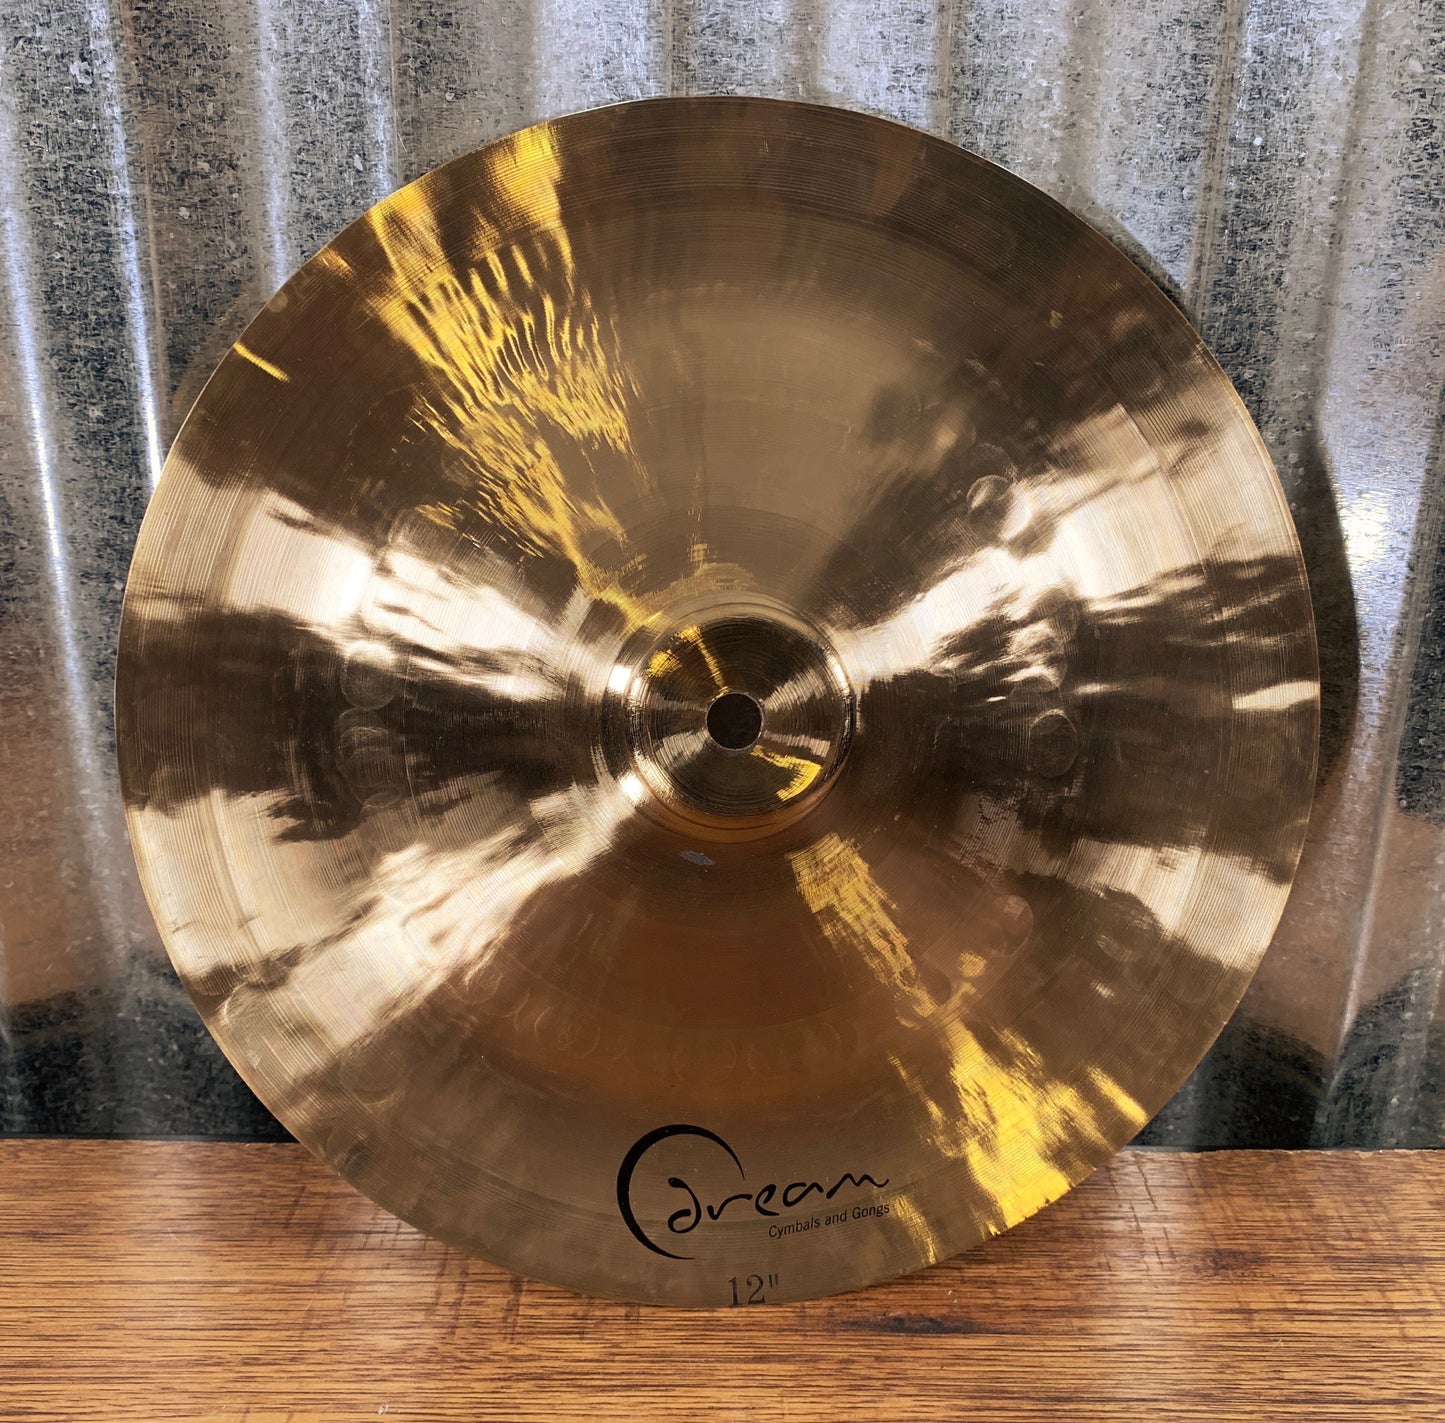 Dream Cymbals CH12 Hand Forged & Hammered 12" China Cymbal